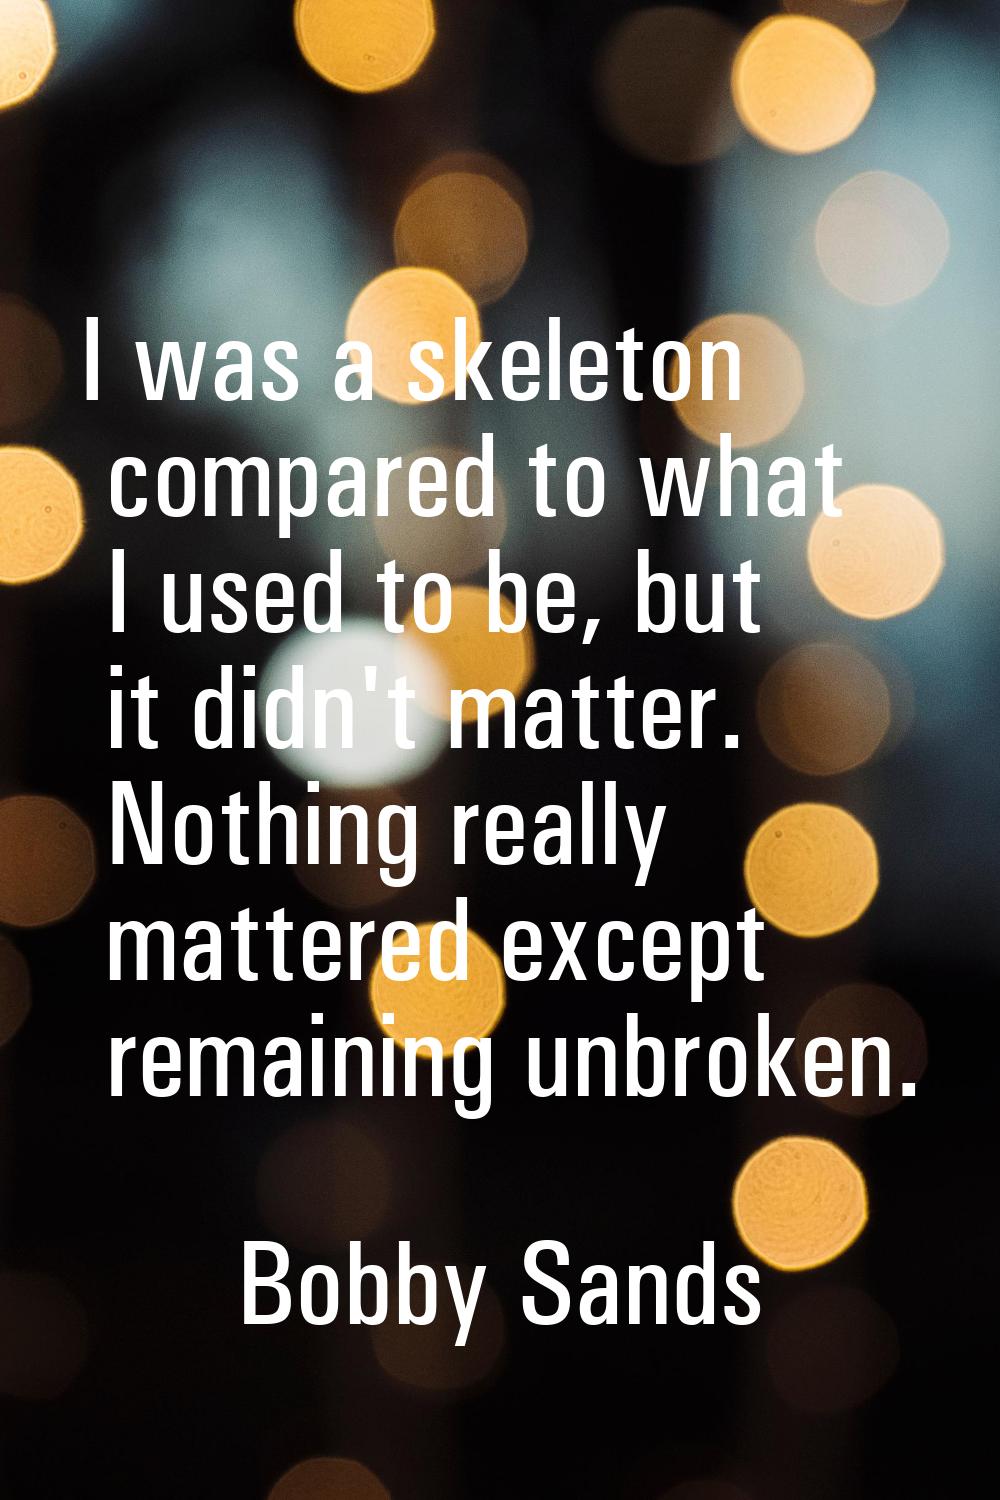 I was a skeleton compared to what I used to be, but it didn't matter. Nothing really mattered excep